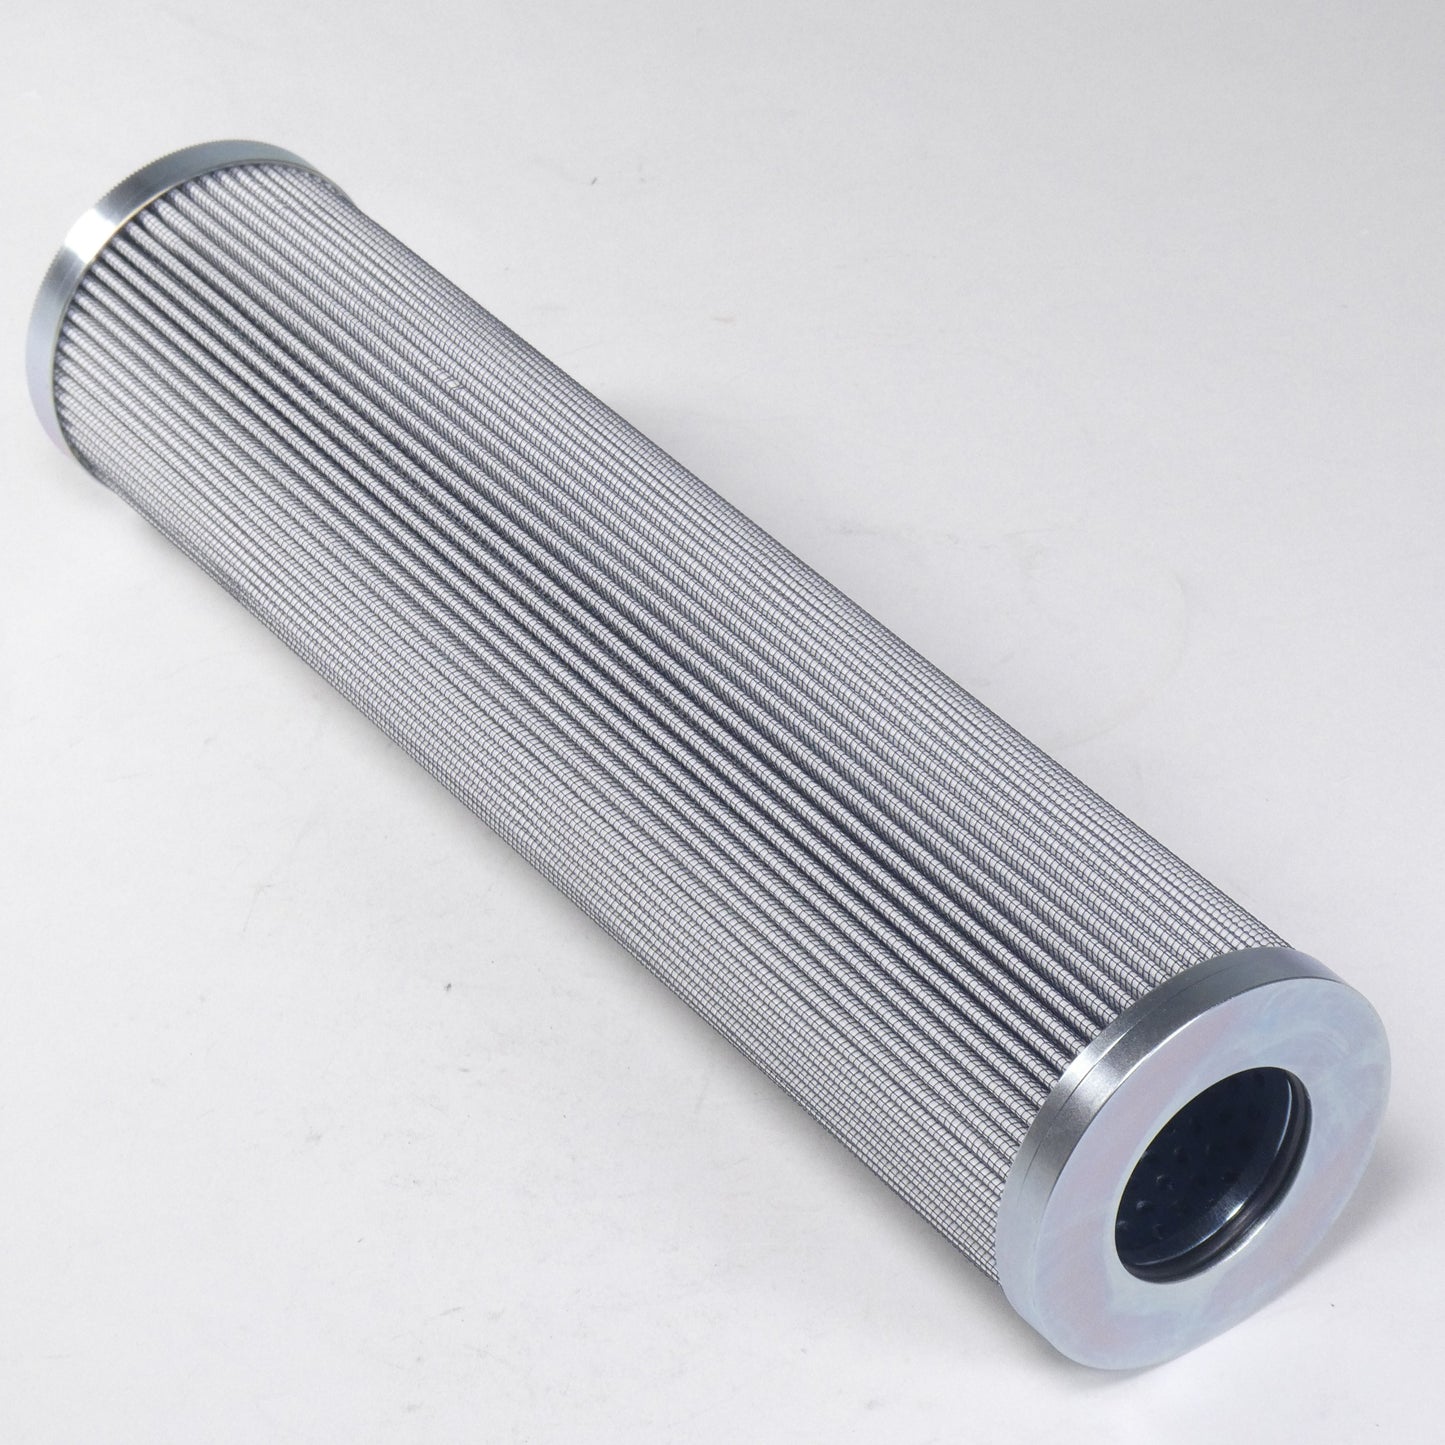 Hydrafil Replacement Filter Element for Mahle 891018SMXVST16FPM